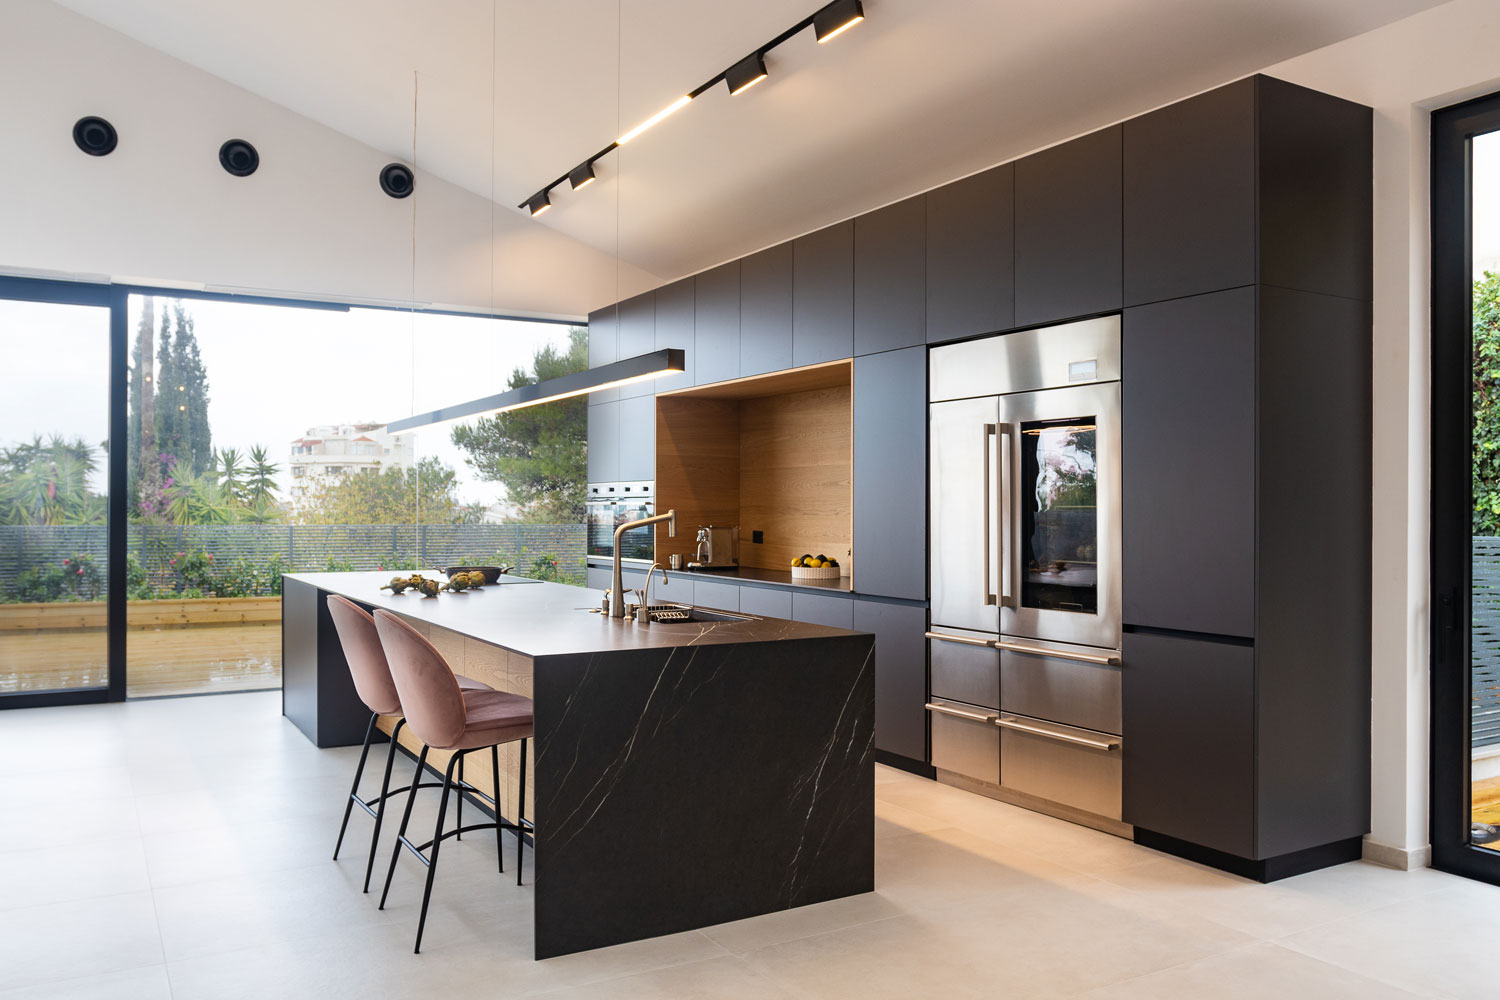 Ultra contemporary inspired kitchen with black granite countertop on the breakfast bar and main kitchen area